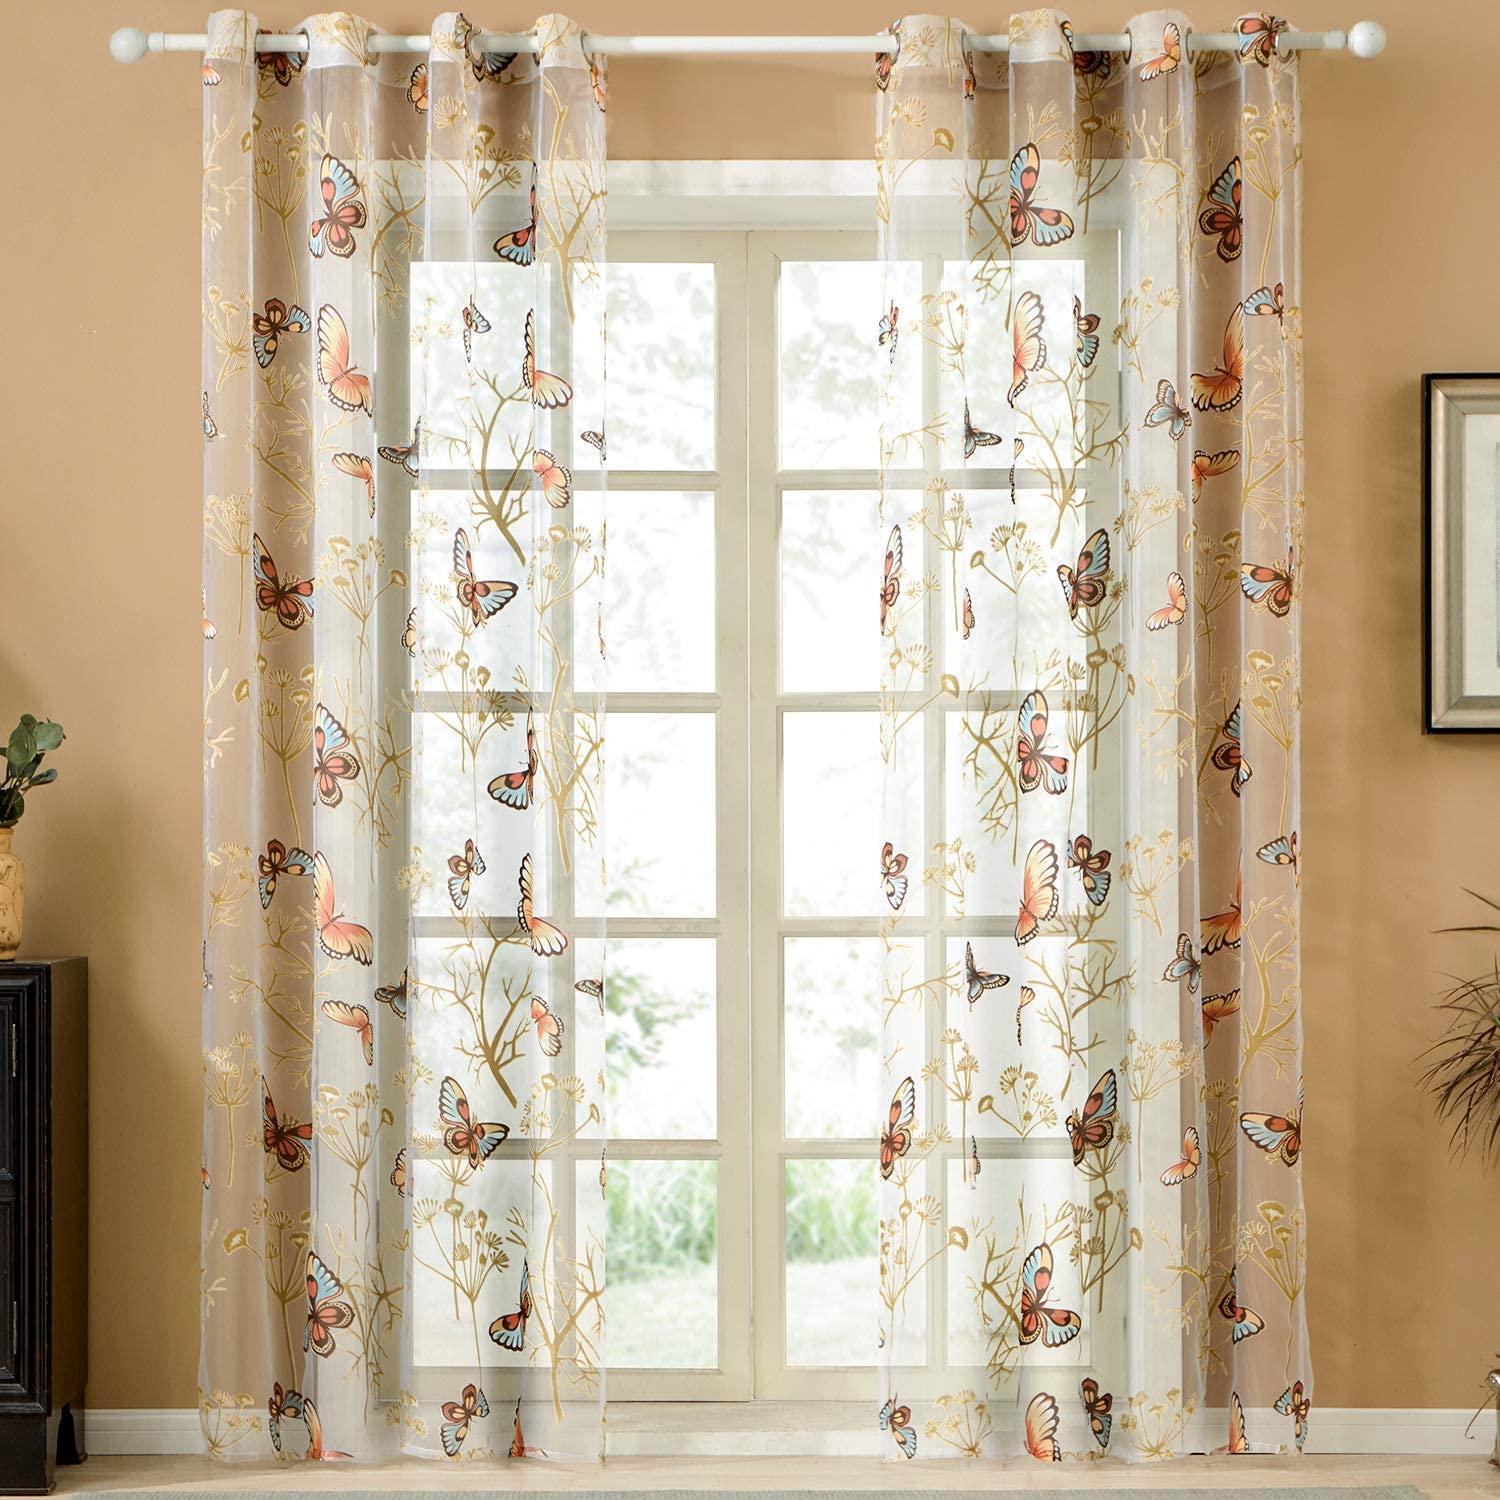 Customized Size-Butterfly Voile Sheer Curtains For Bedroom Living Room Nursery Grommet Window Curtains, 1 Panel - Topfinel